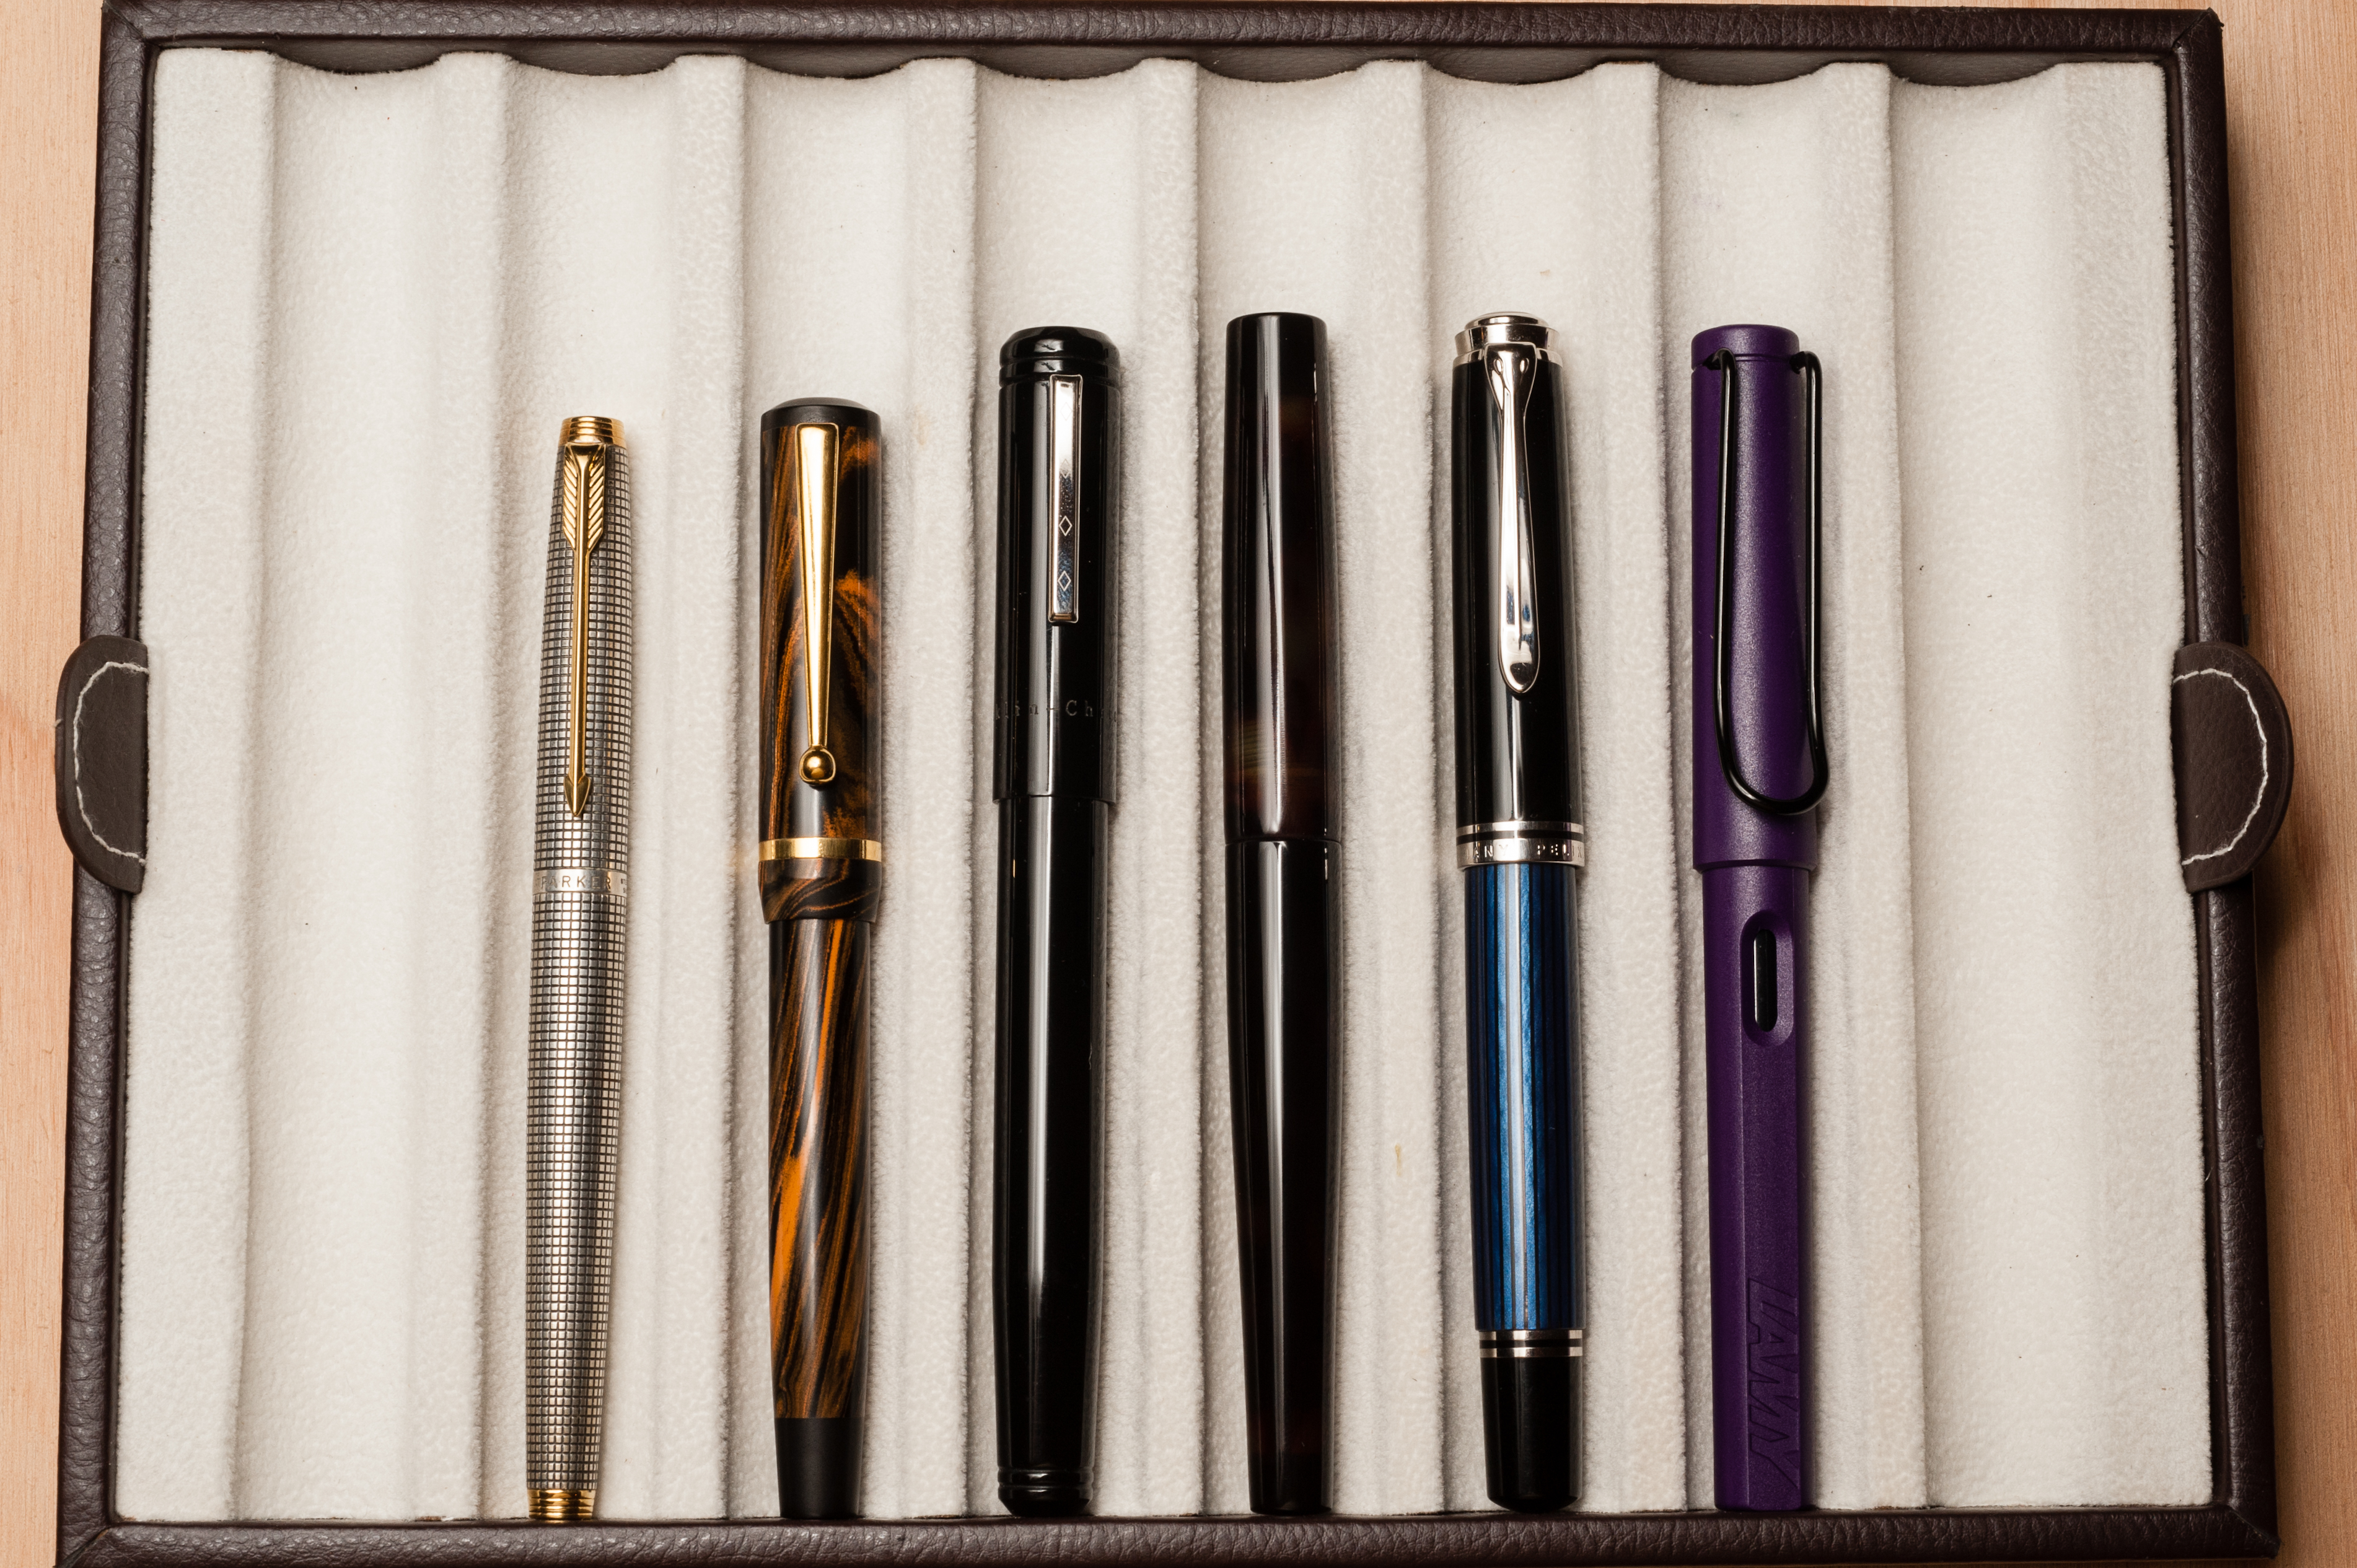 Closed pens from left to right: Parker 75, Edison Beaumont, Franklin-Christoph Model 20, Newton Townsend Slim Short, Pelikan M805, and Lamy Safari